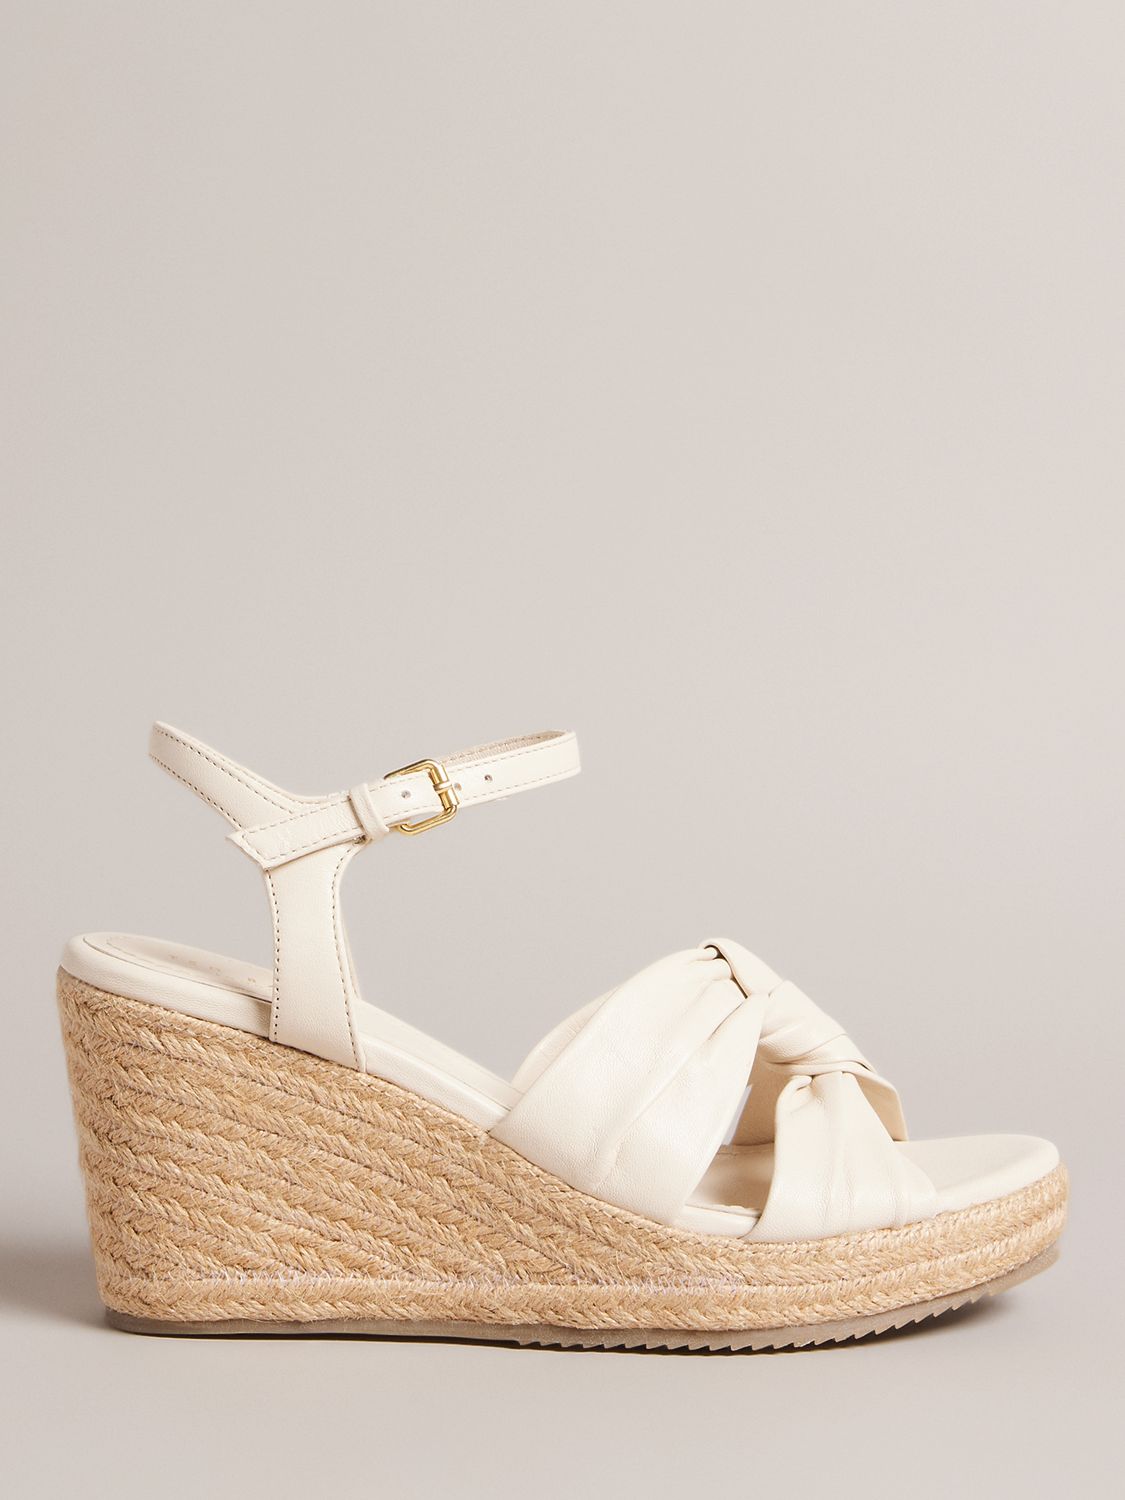 Ted Baker Carda Knotted Leather Wedge Espadrille Sandals, Ivory